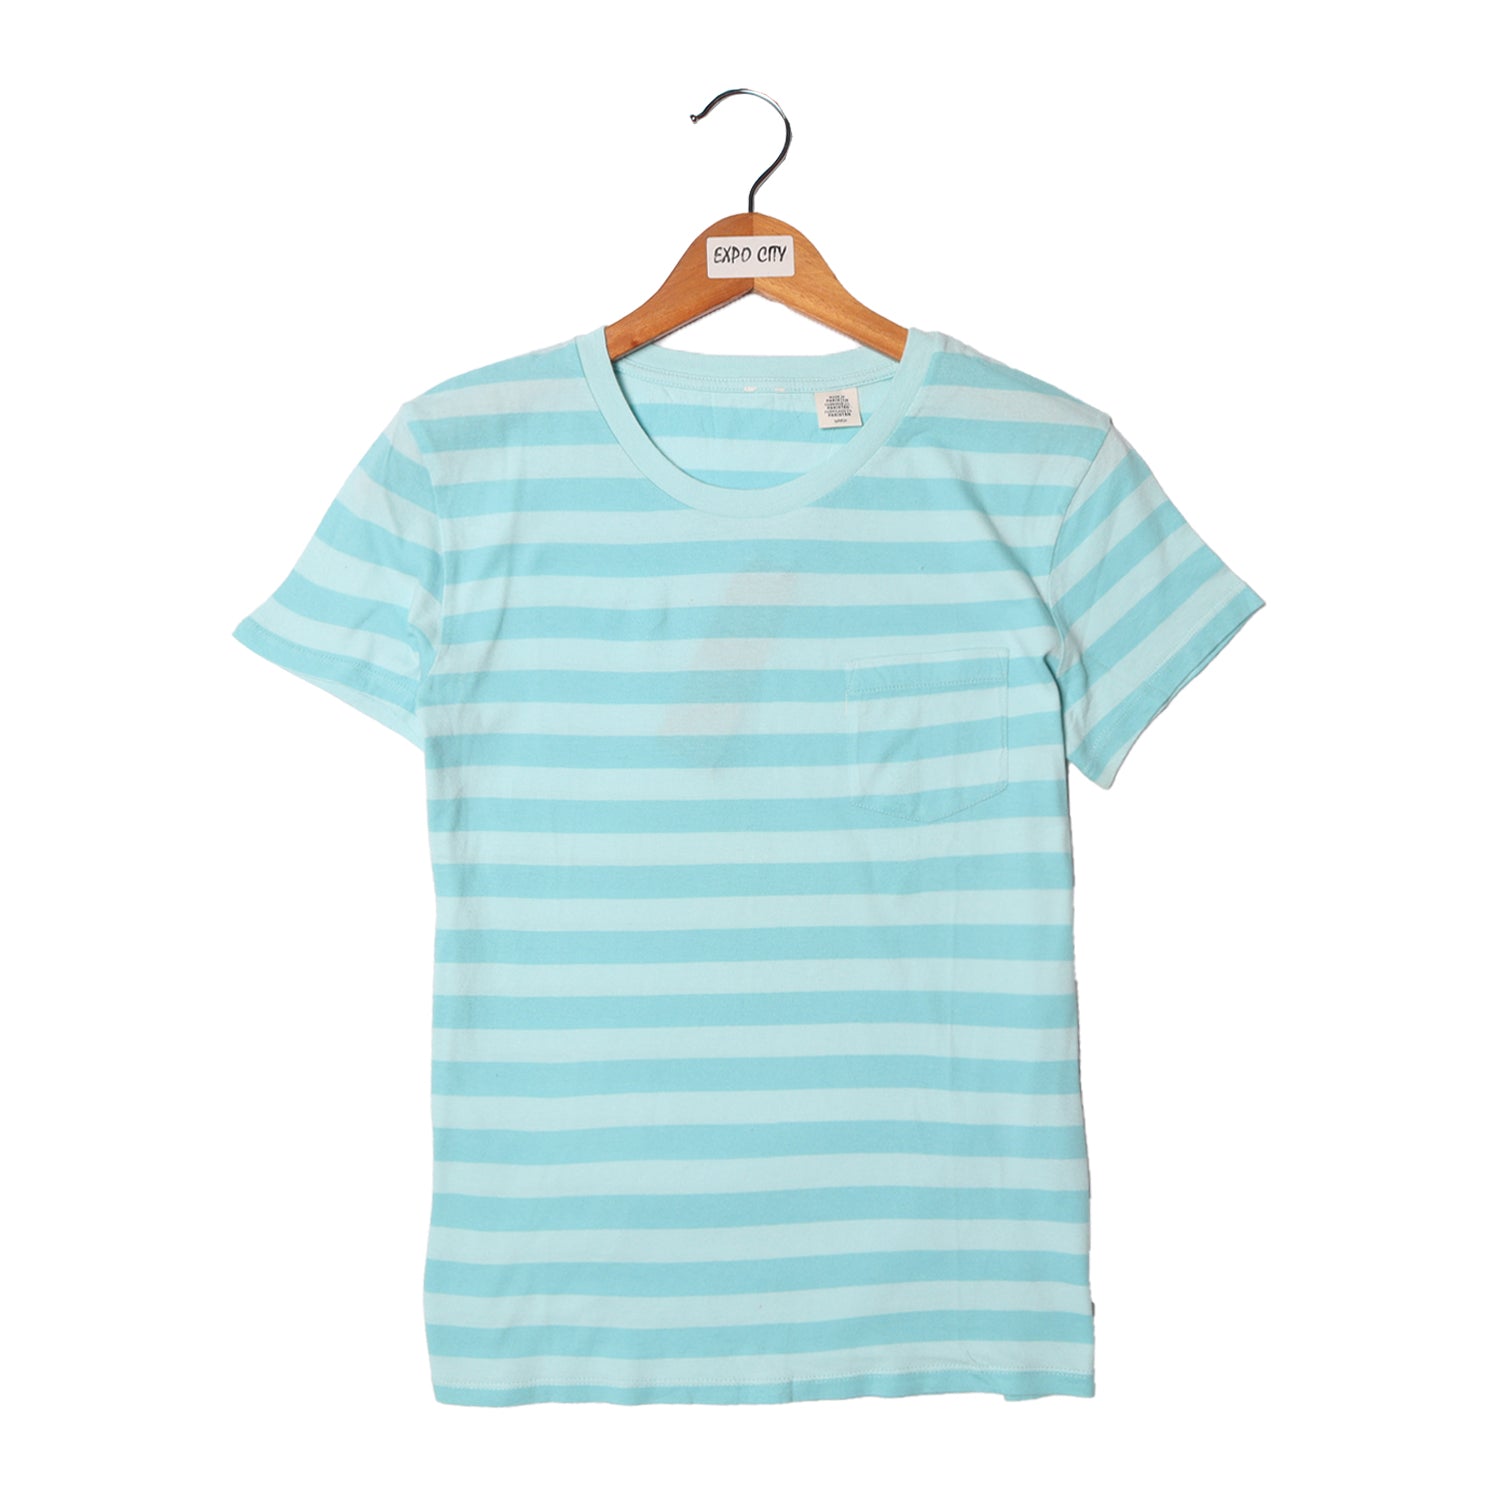 NEW SKY BLUE WITH BLUE STRIPES & POCKET HALF SLEEVES T-SHIRT FOR GIRLS